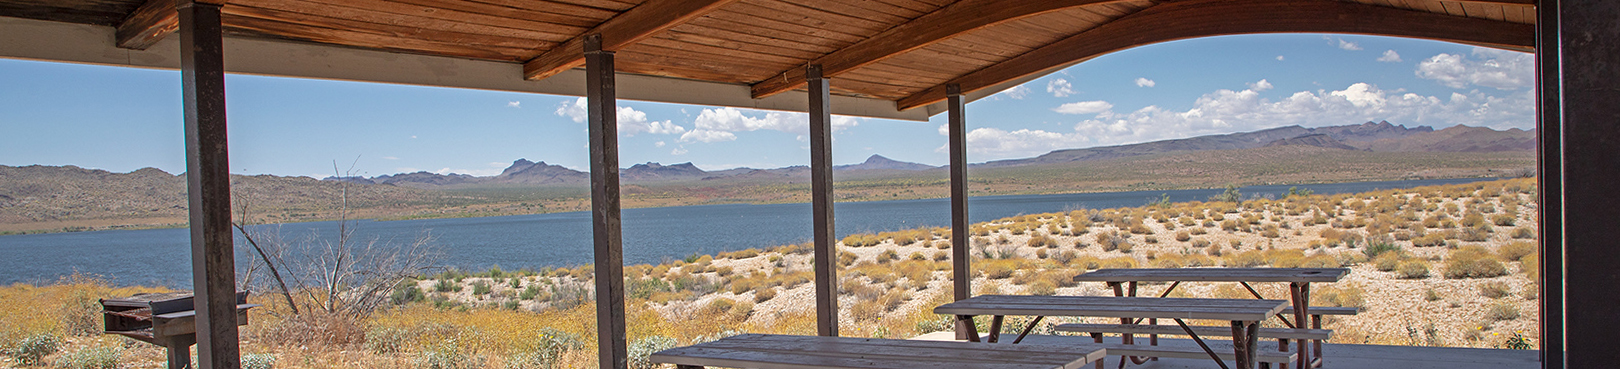 A view of Alamo Lake in the distance from a covered group ramada with picnic tables and a grill.